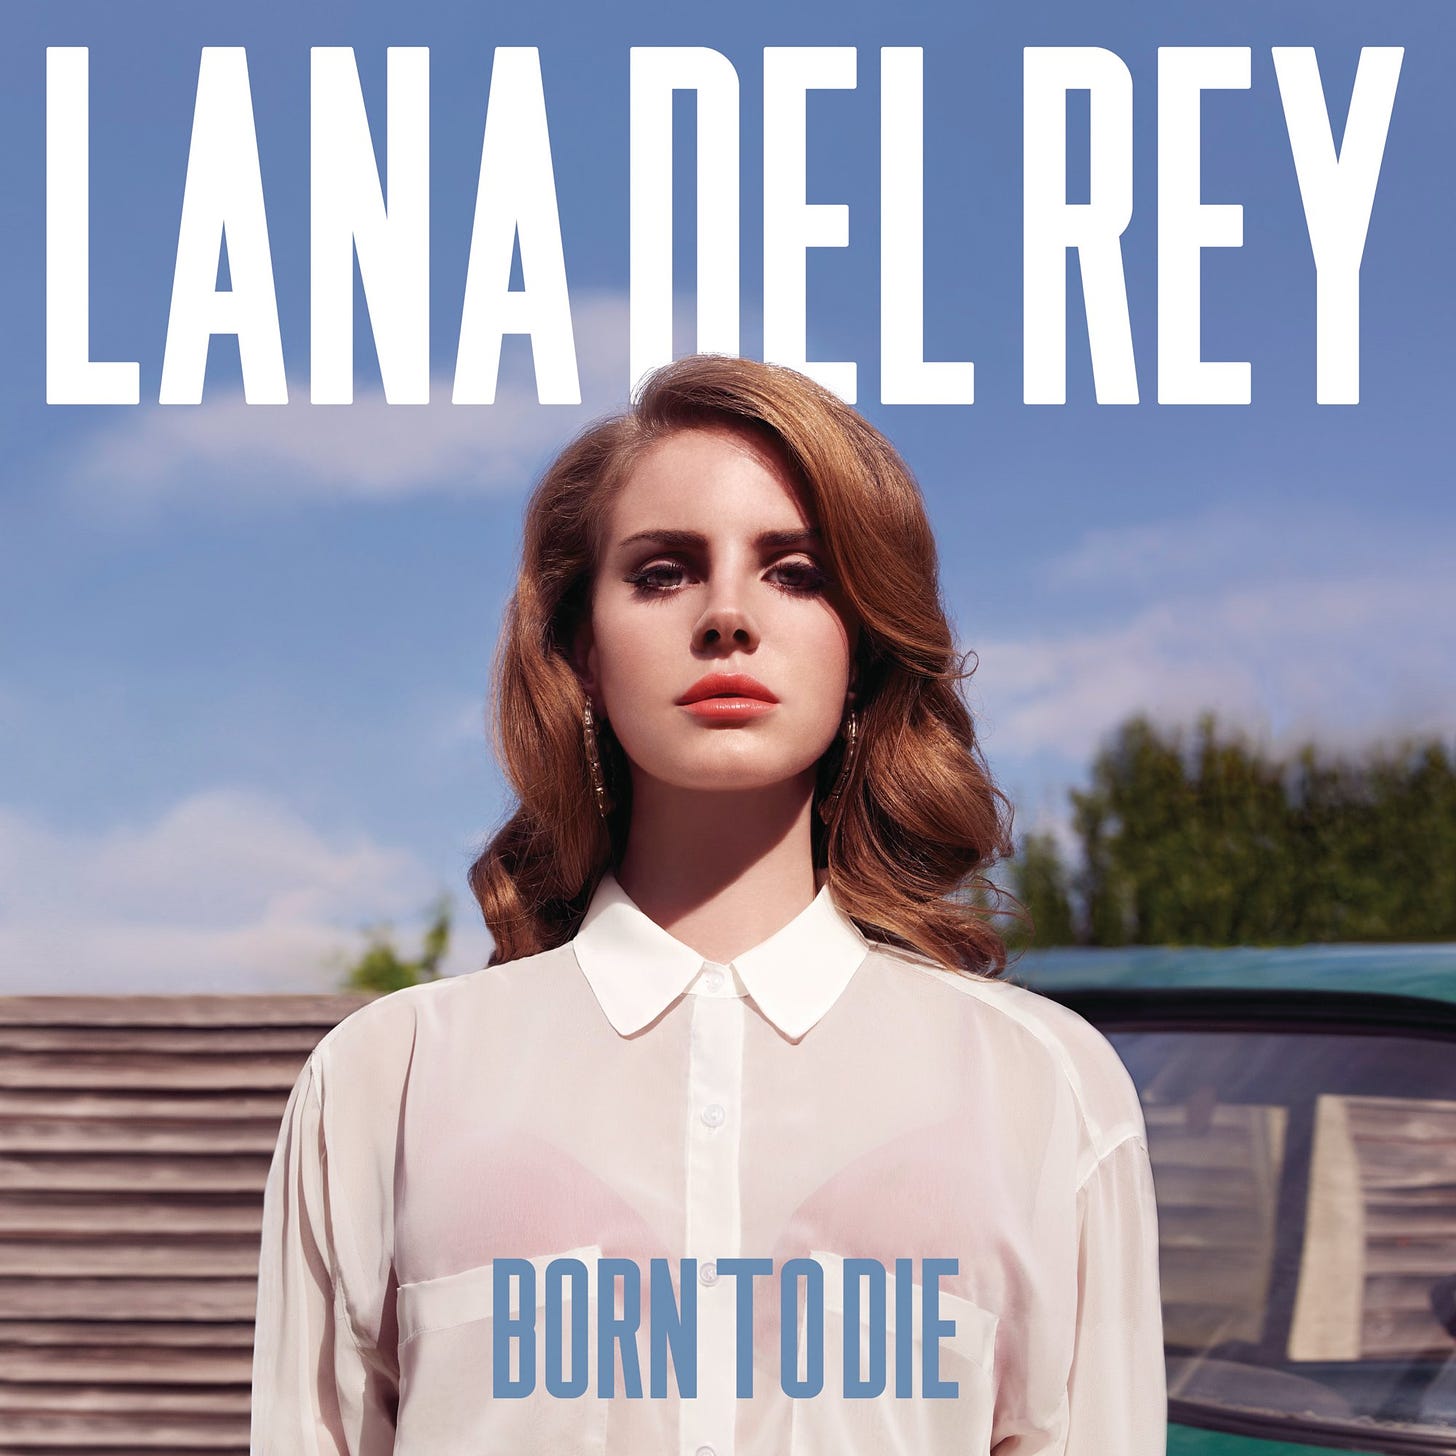 Born to Die images and artwork | Last.fm